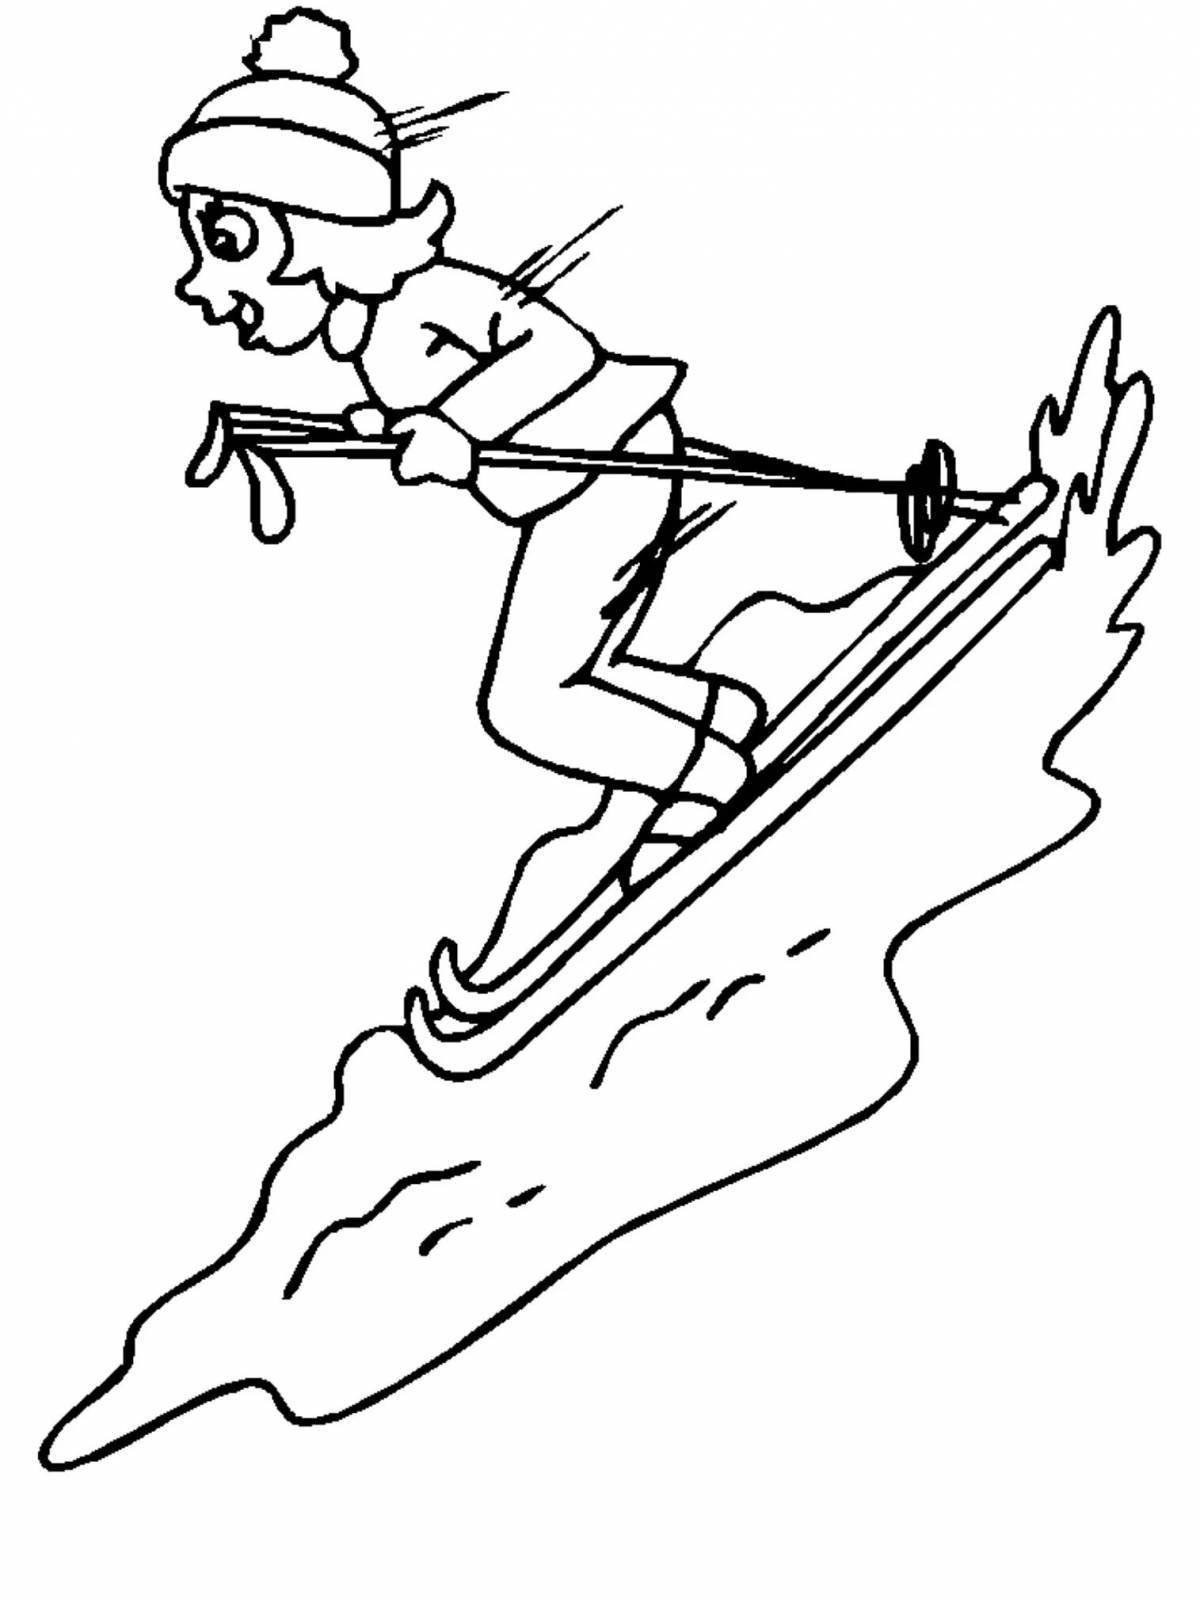 Coloring page for skier kid